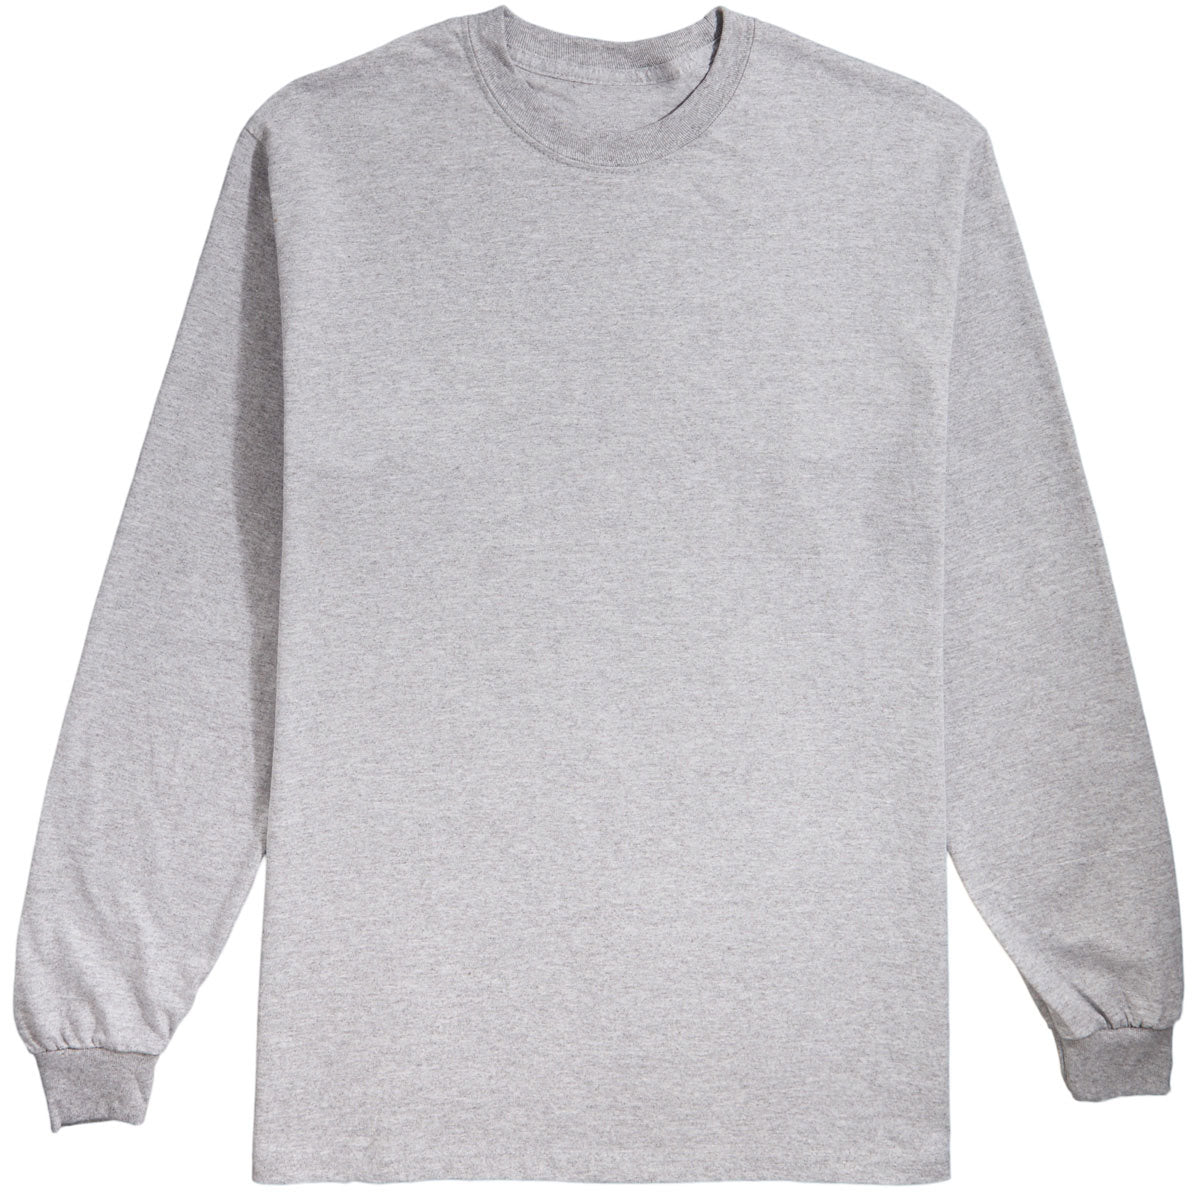 Converse Mouse Long Sleeve T-Shirt - Heather Grey - XL image 1